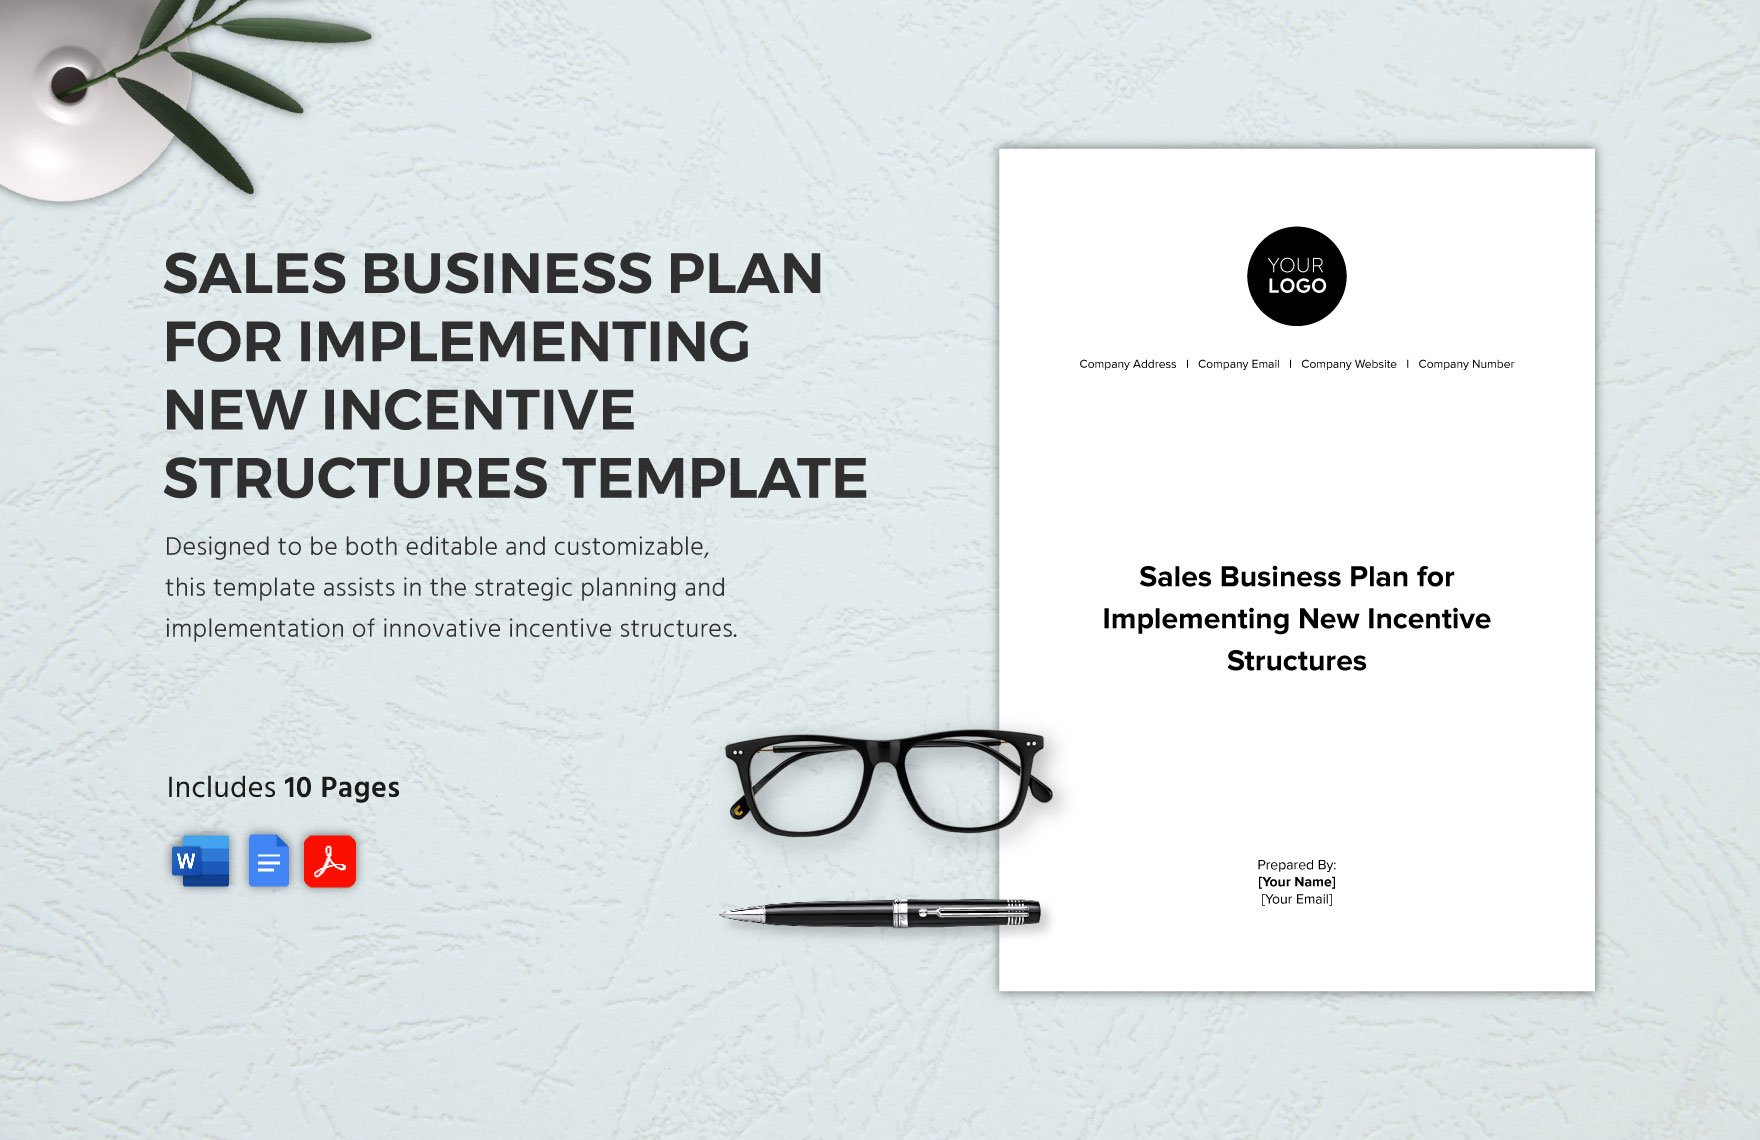 Sales Business Plan for Implementing New Incentive Structures Template